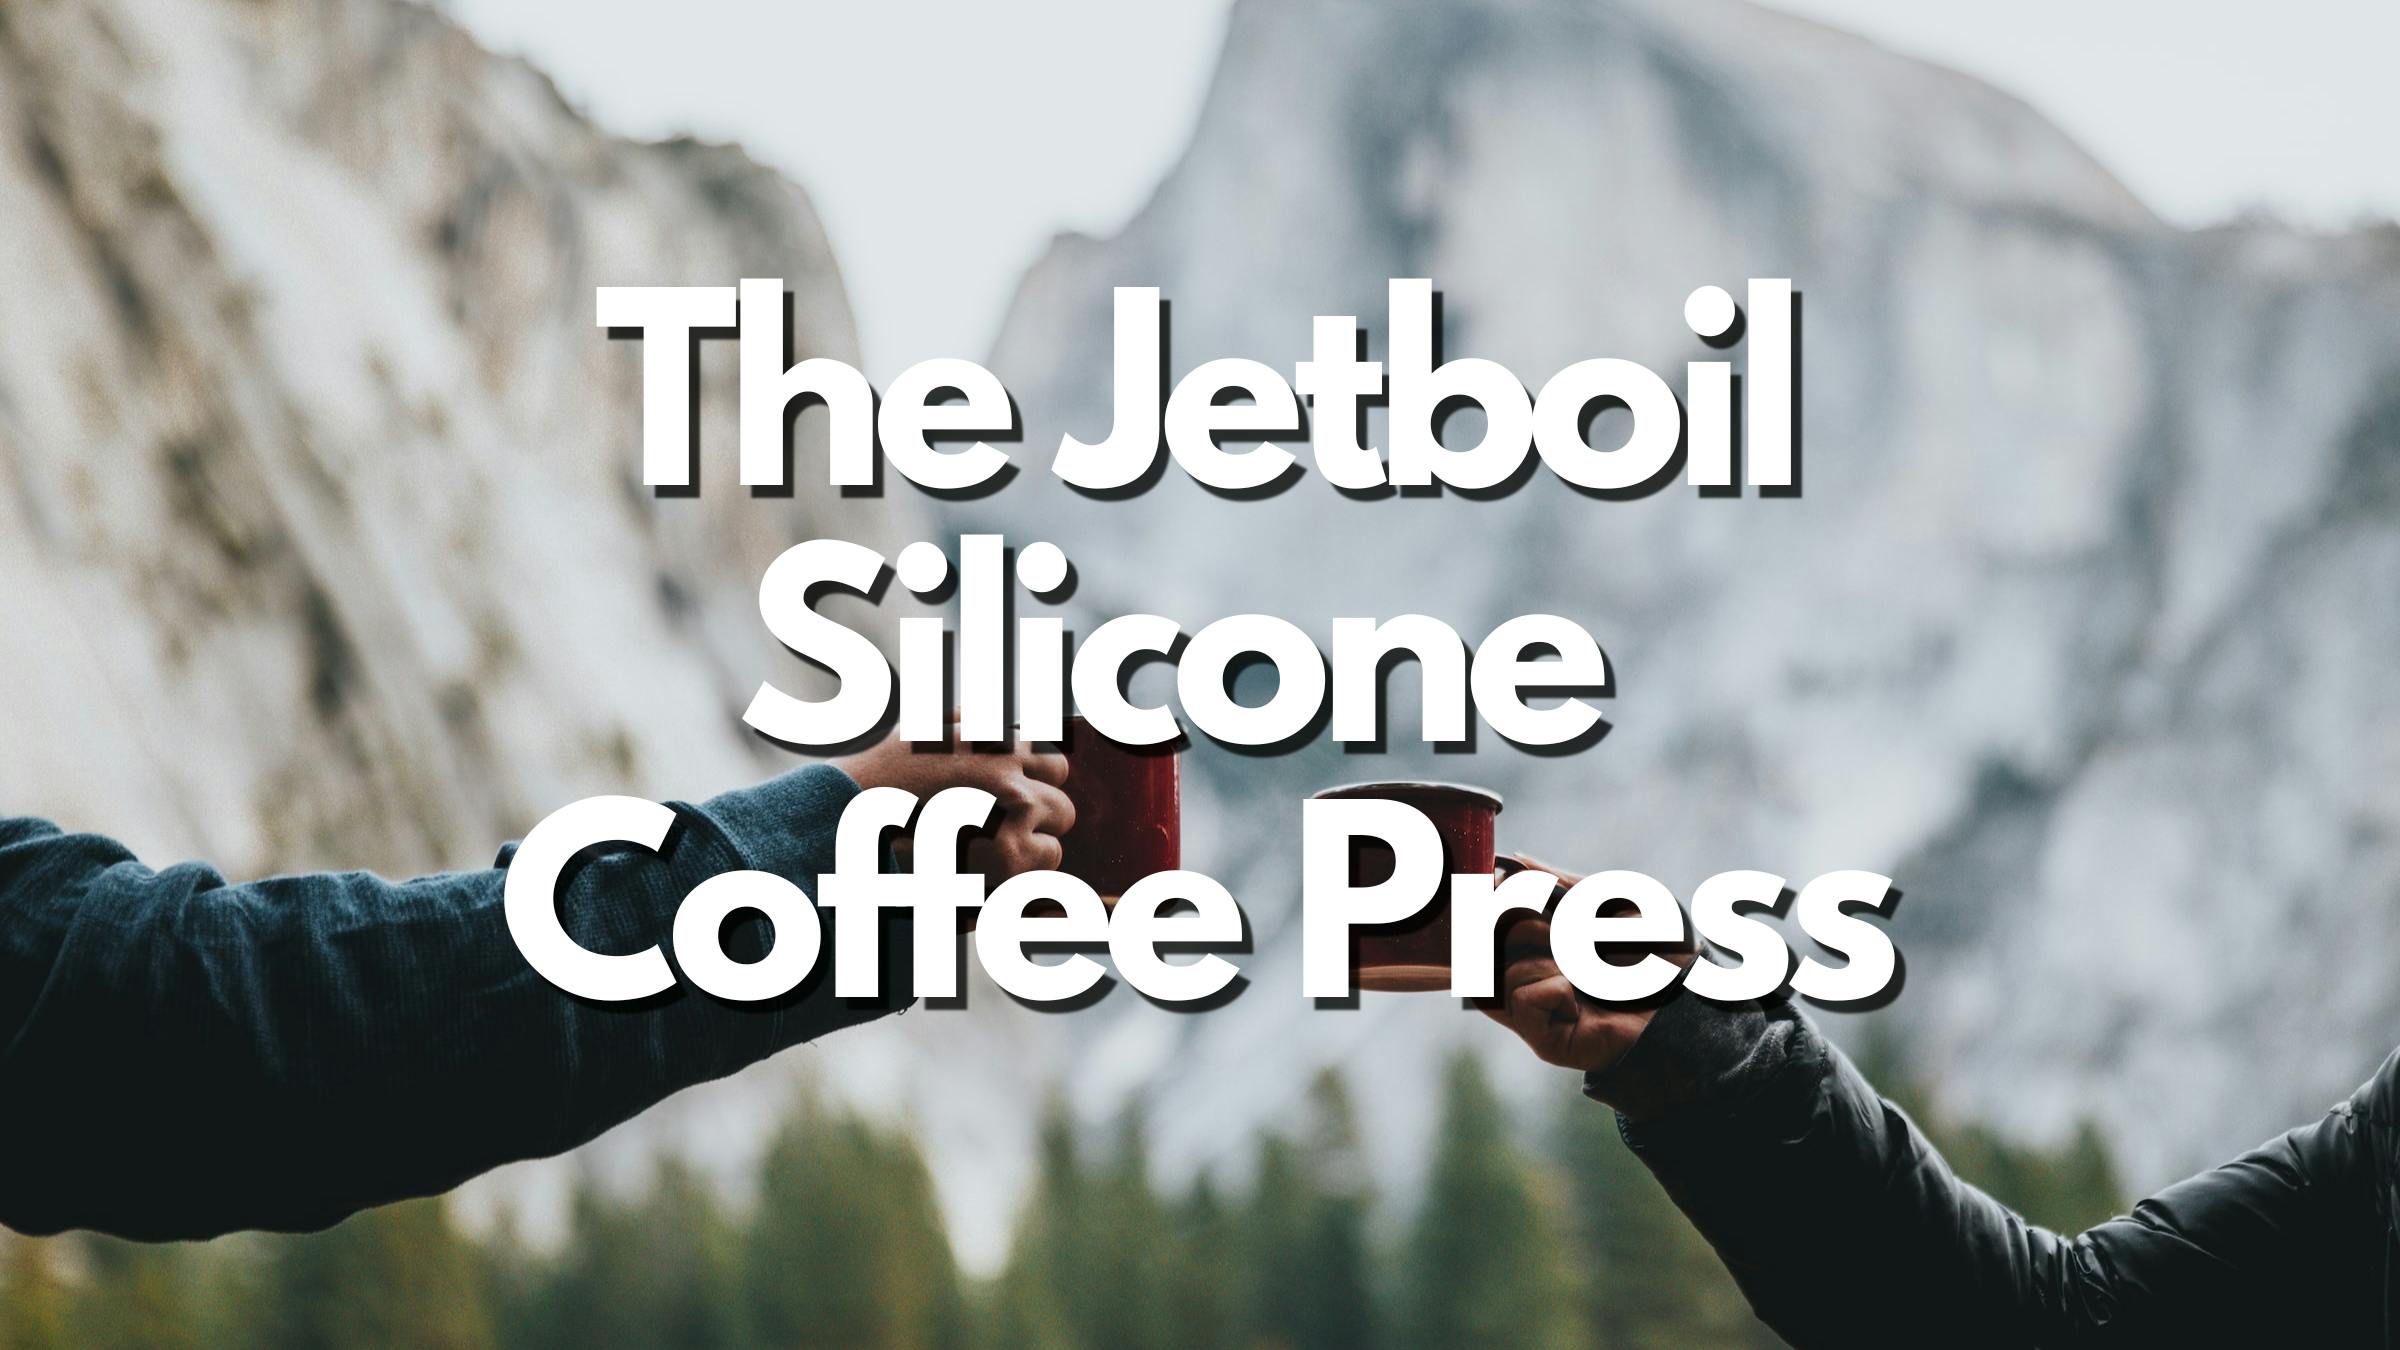 Campers cheers-ing with coffee cups, with the text text 'The Jetboil Silicone Coffee Press' overlaid.